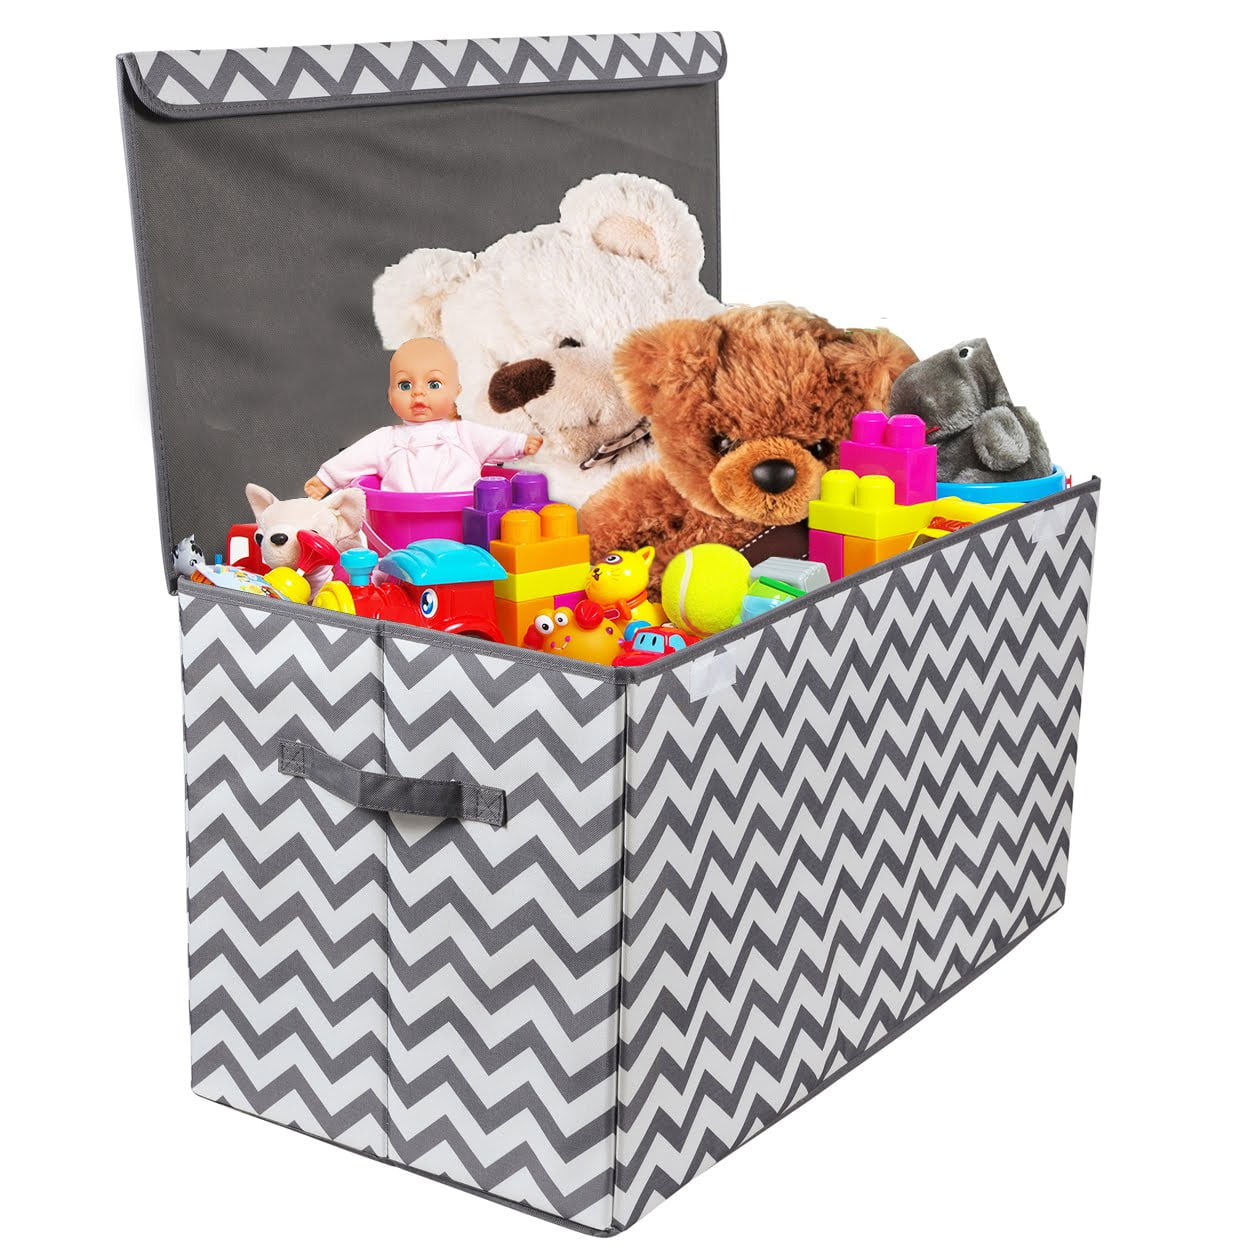 Woffit Toy Storage Organizer Chest for Kids & Living Room, Nursery ...